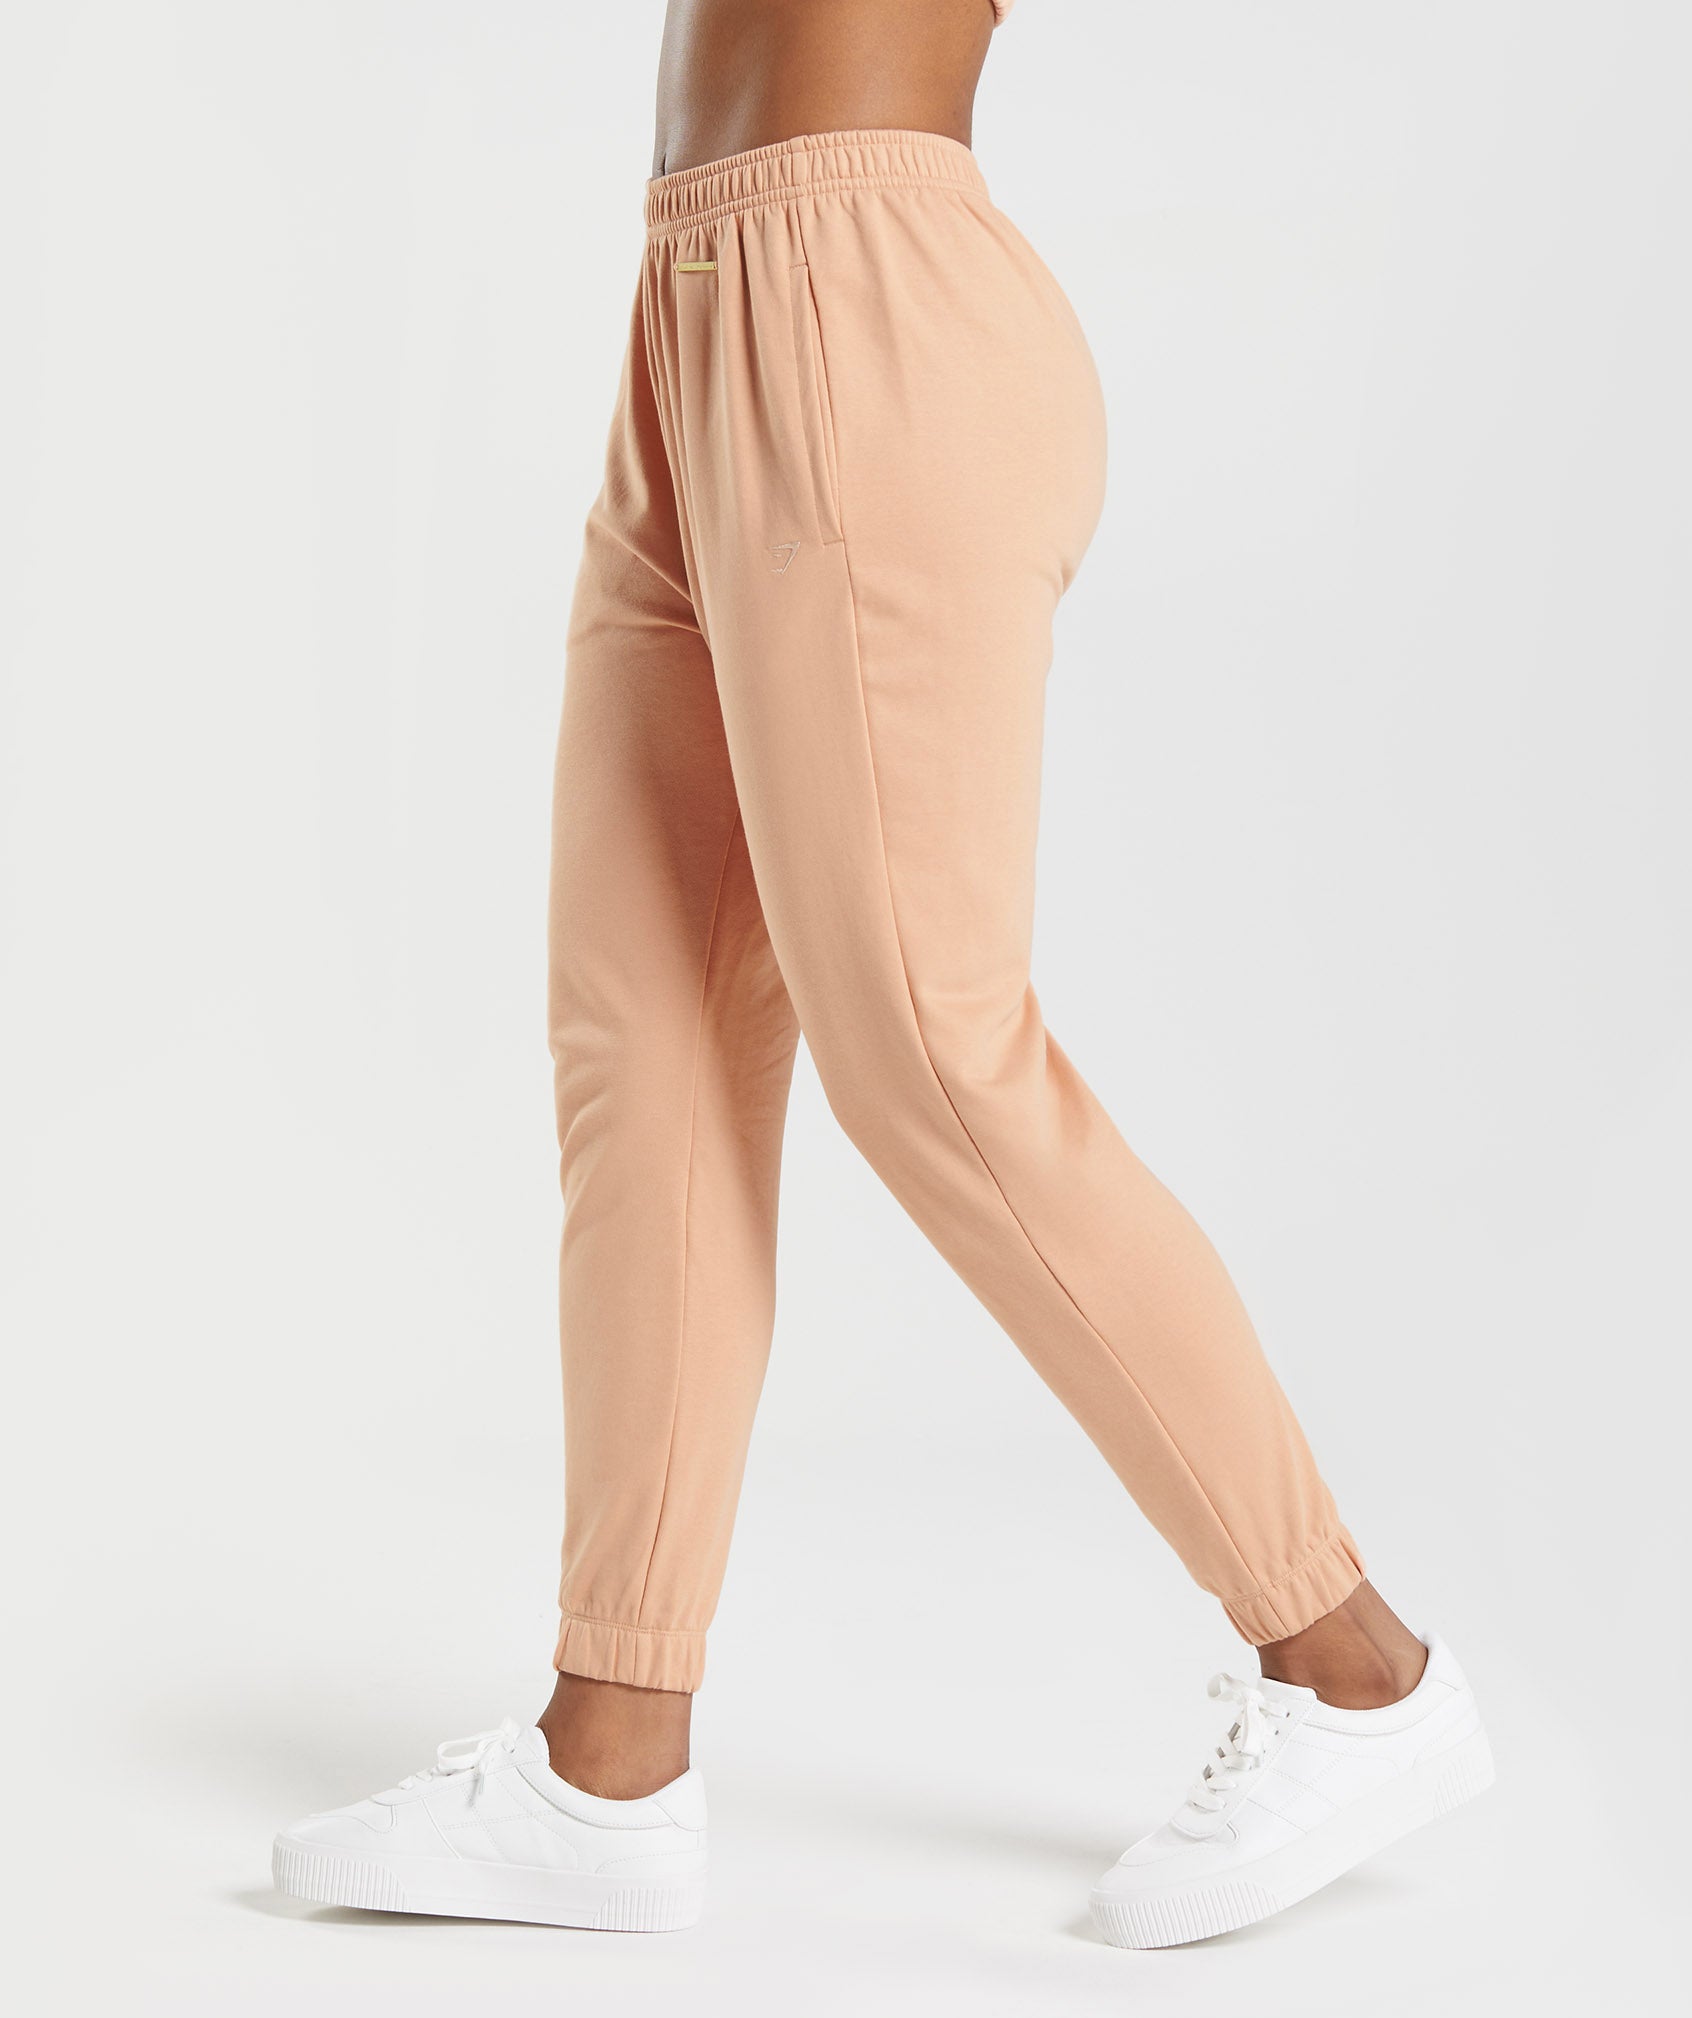 Whitney Loose Joggers in Sunset Beige